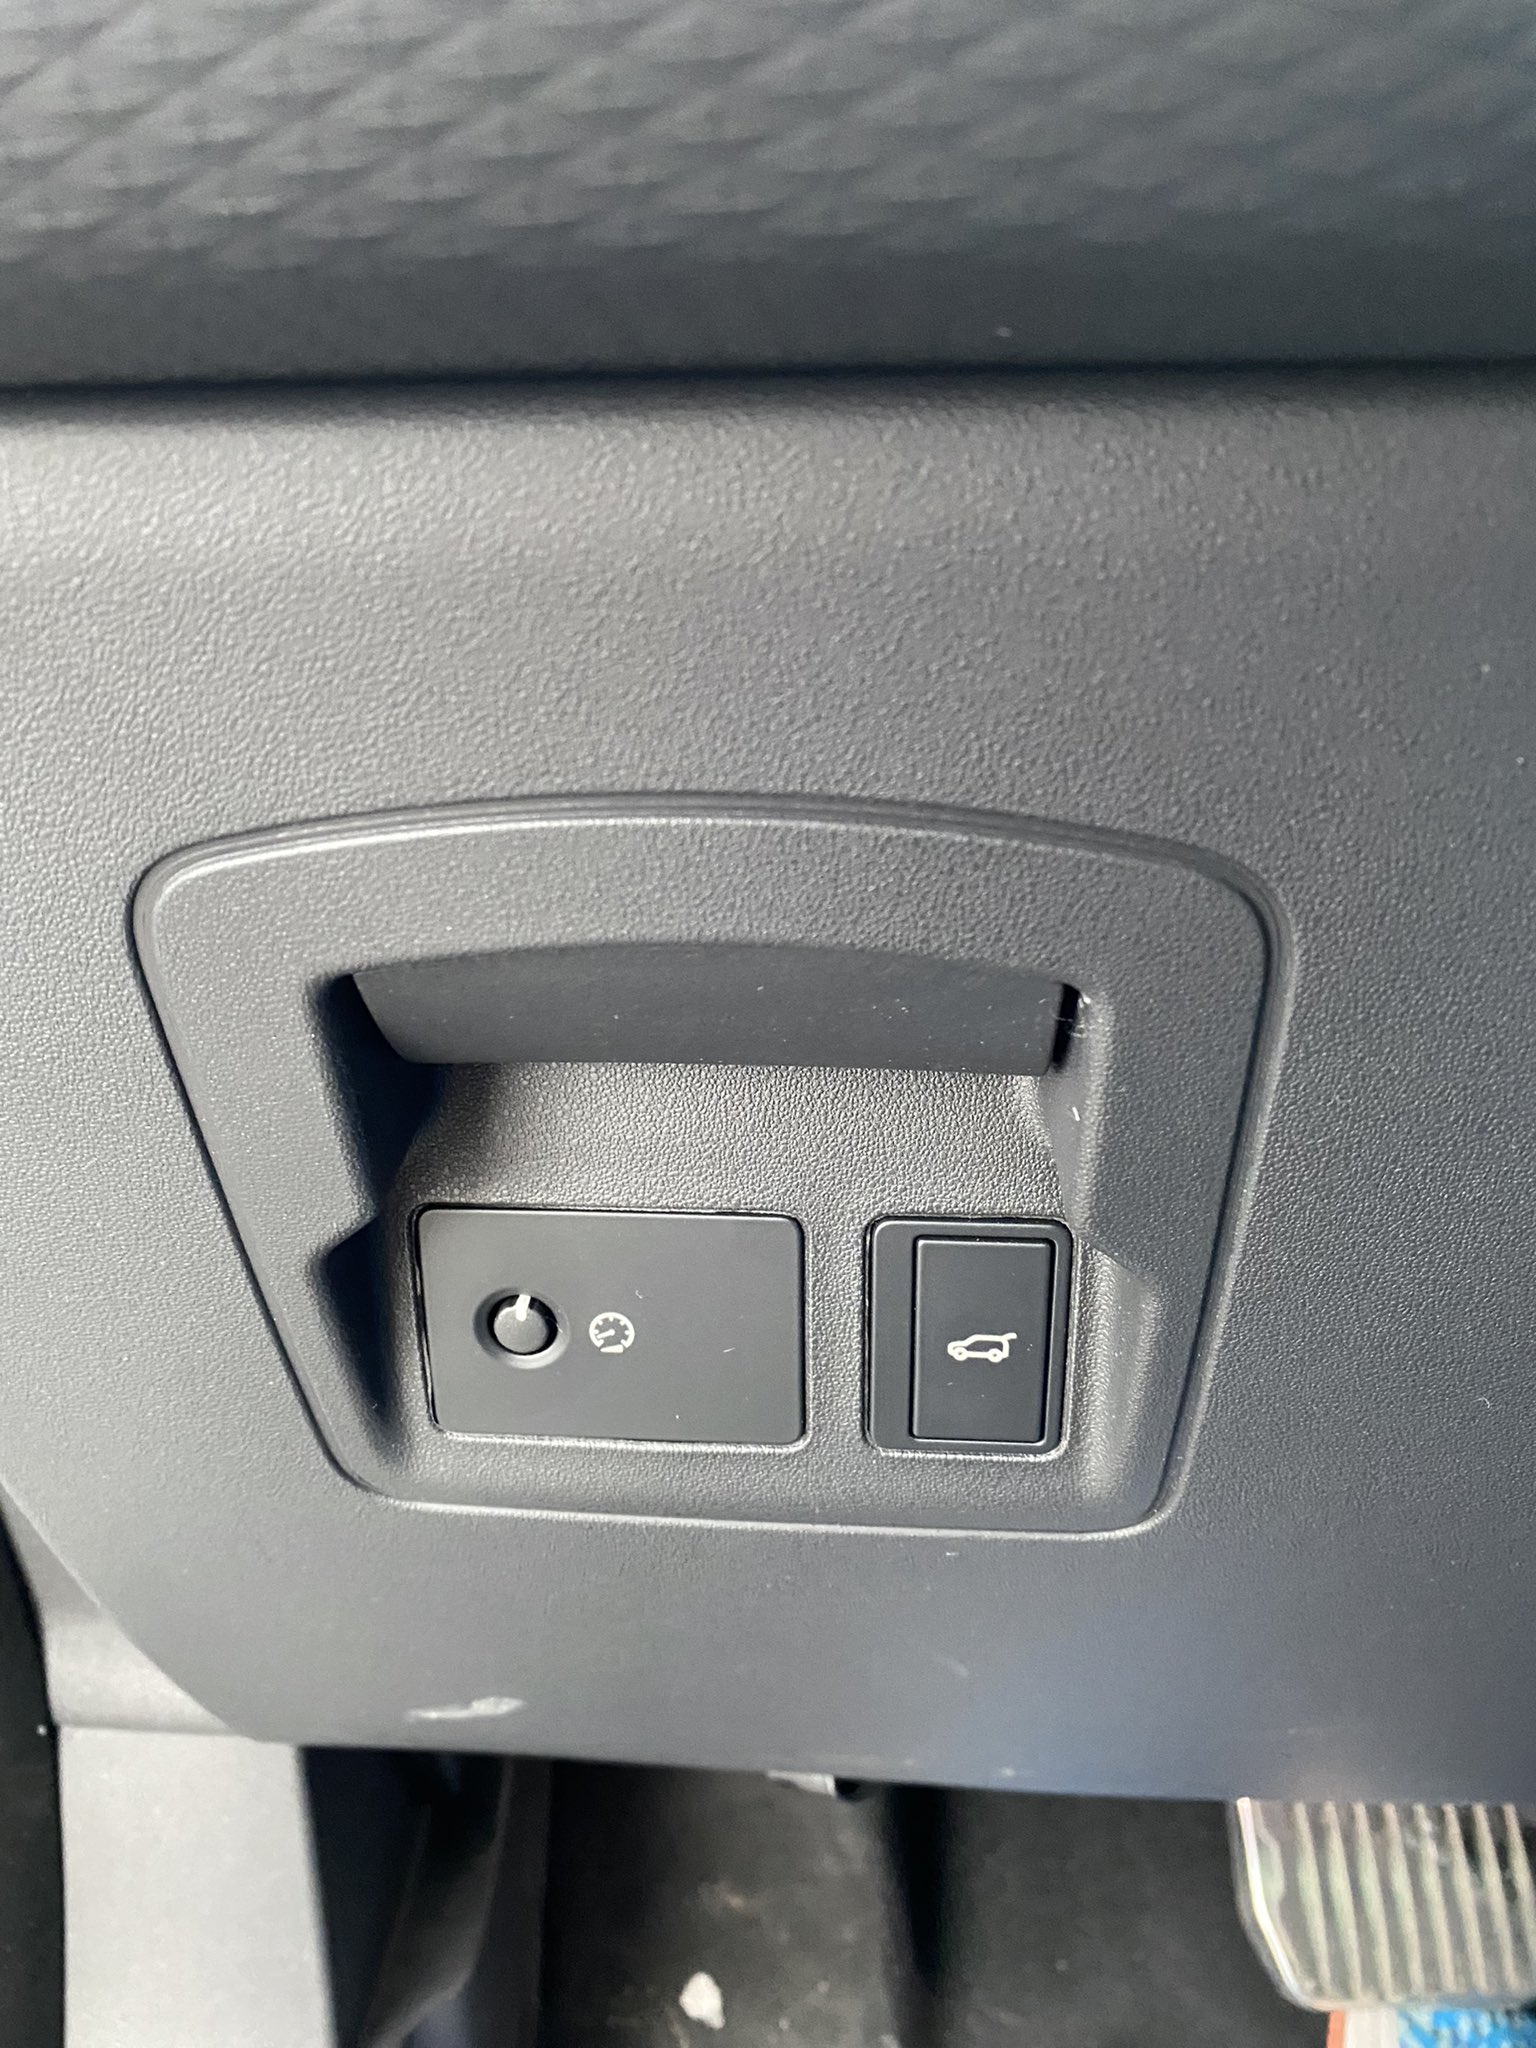 The land rover has a lever for the parking brake, another to shift